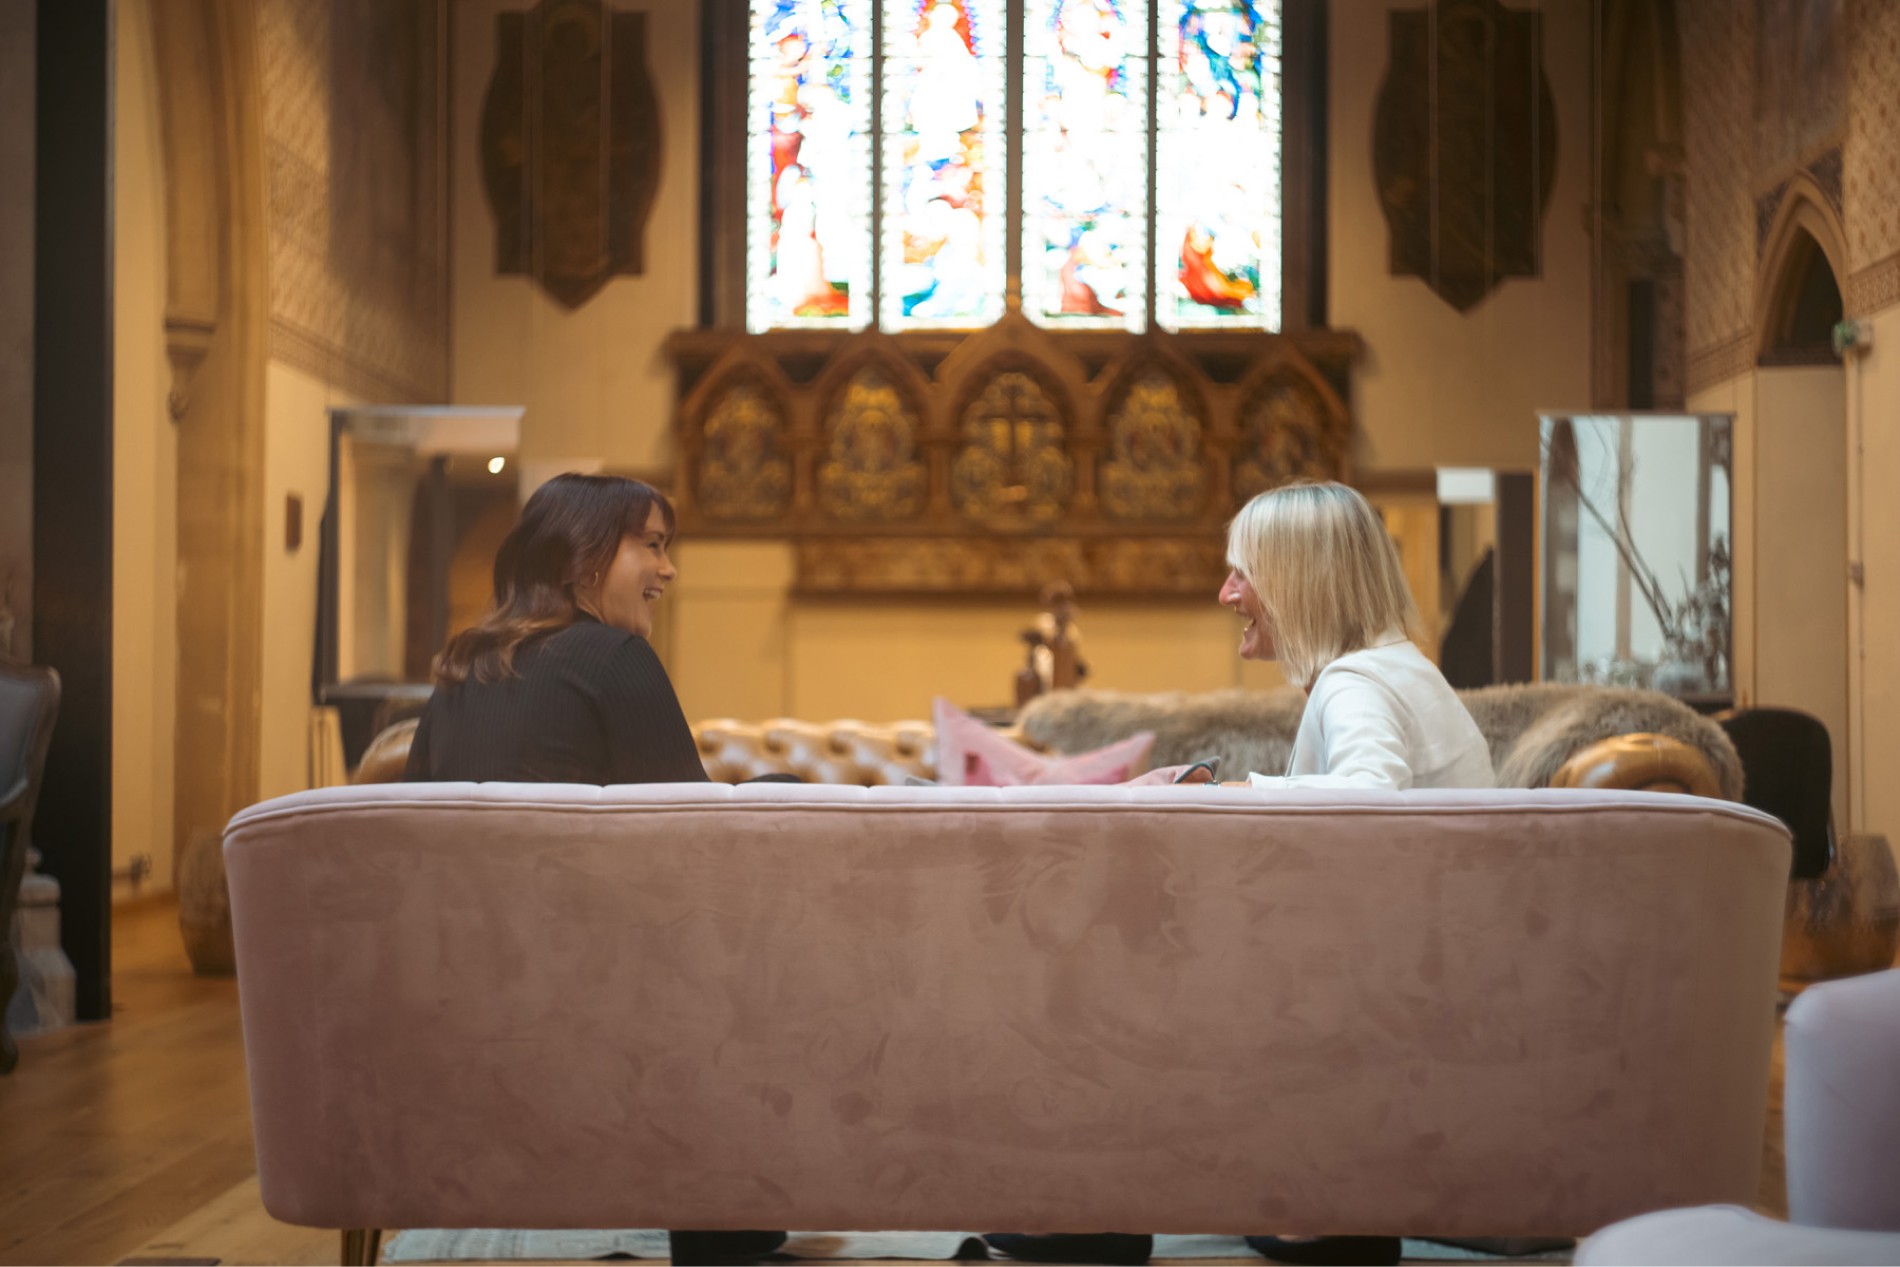 A guest consulation in front of the stained glass window at The Chapel Marlow